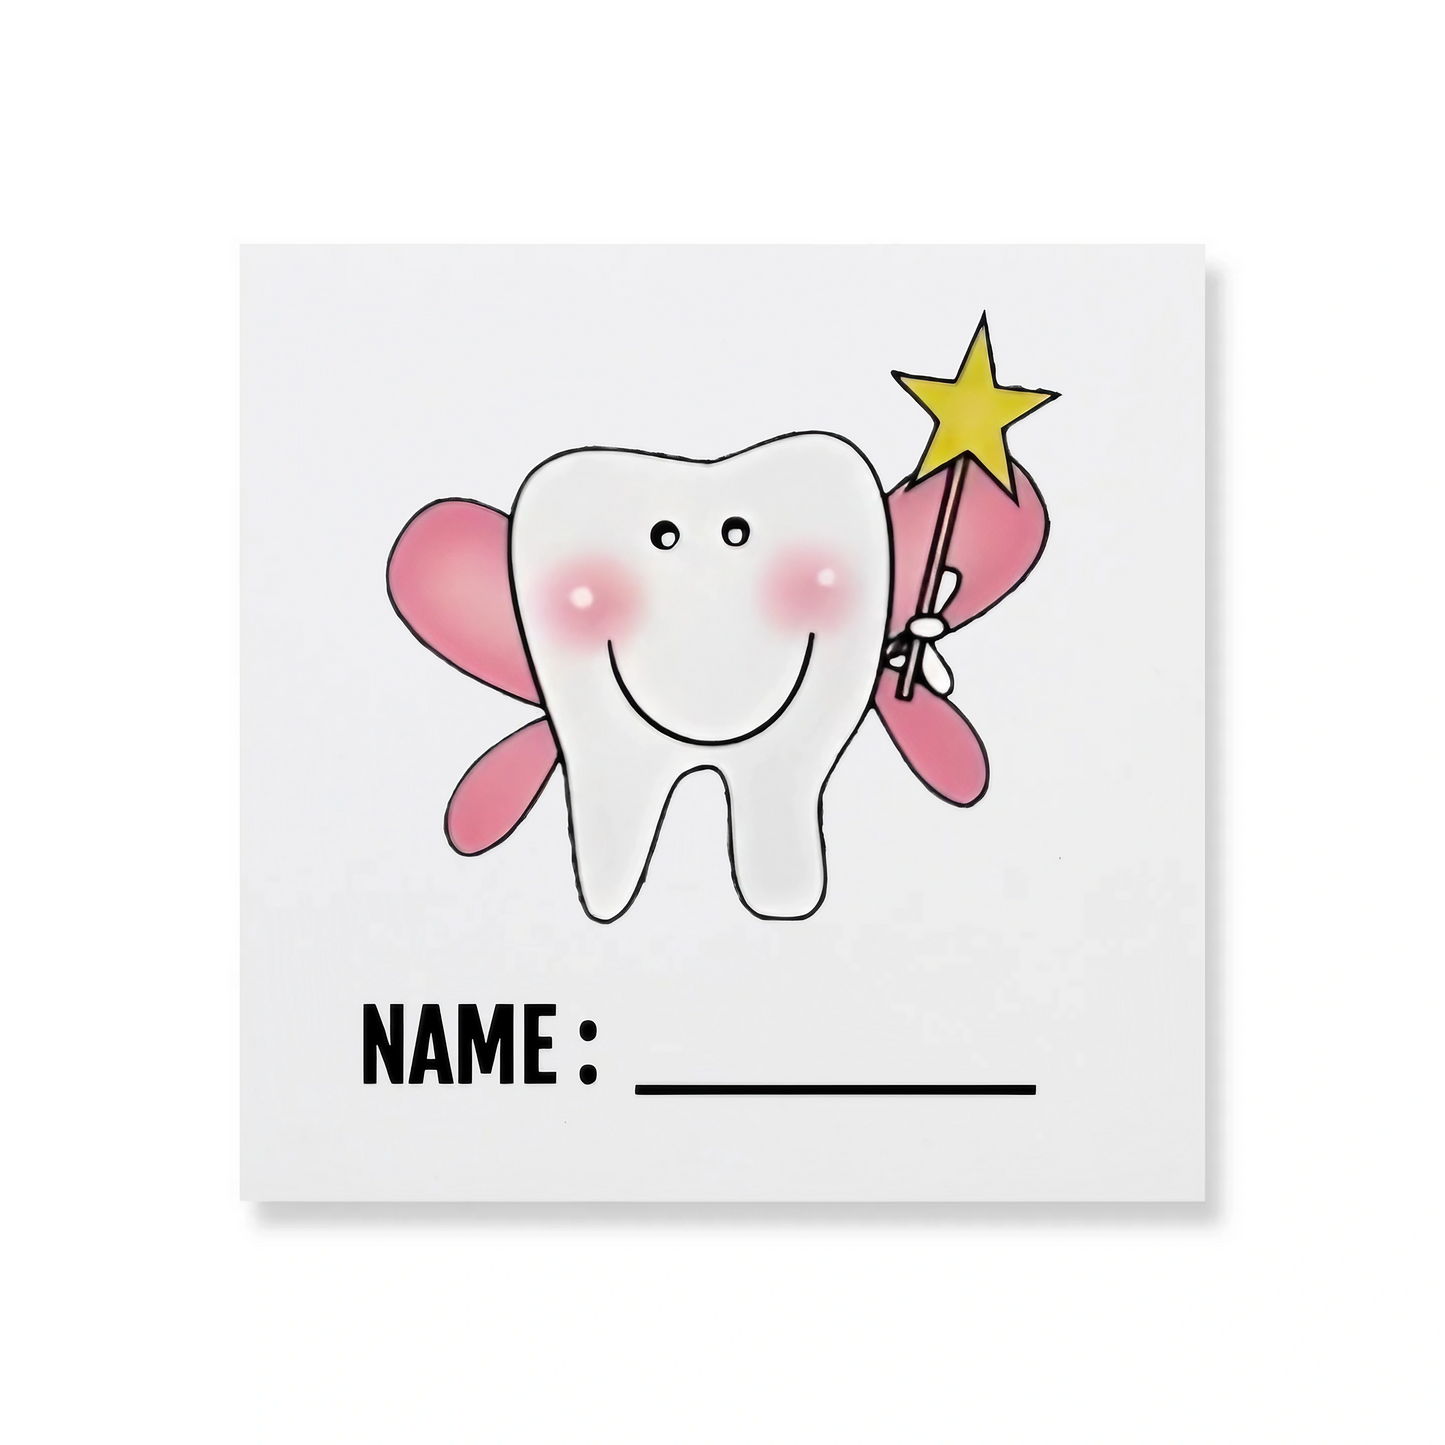 Tooth Fairy Envelopes - Candy Dragonfly